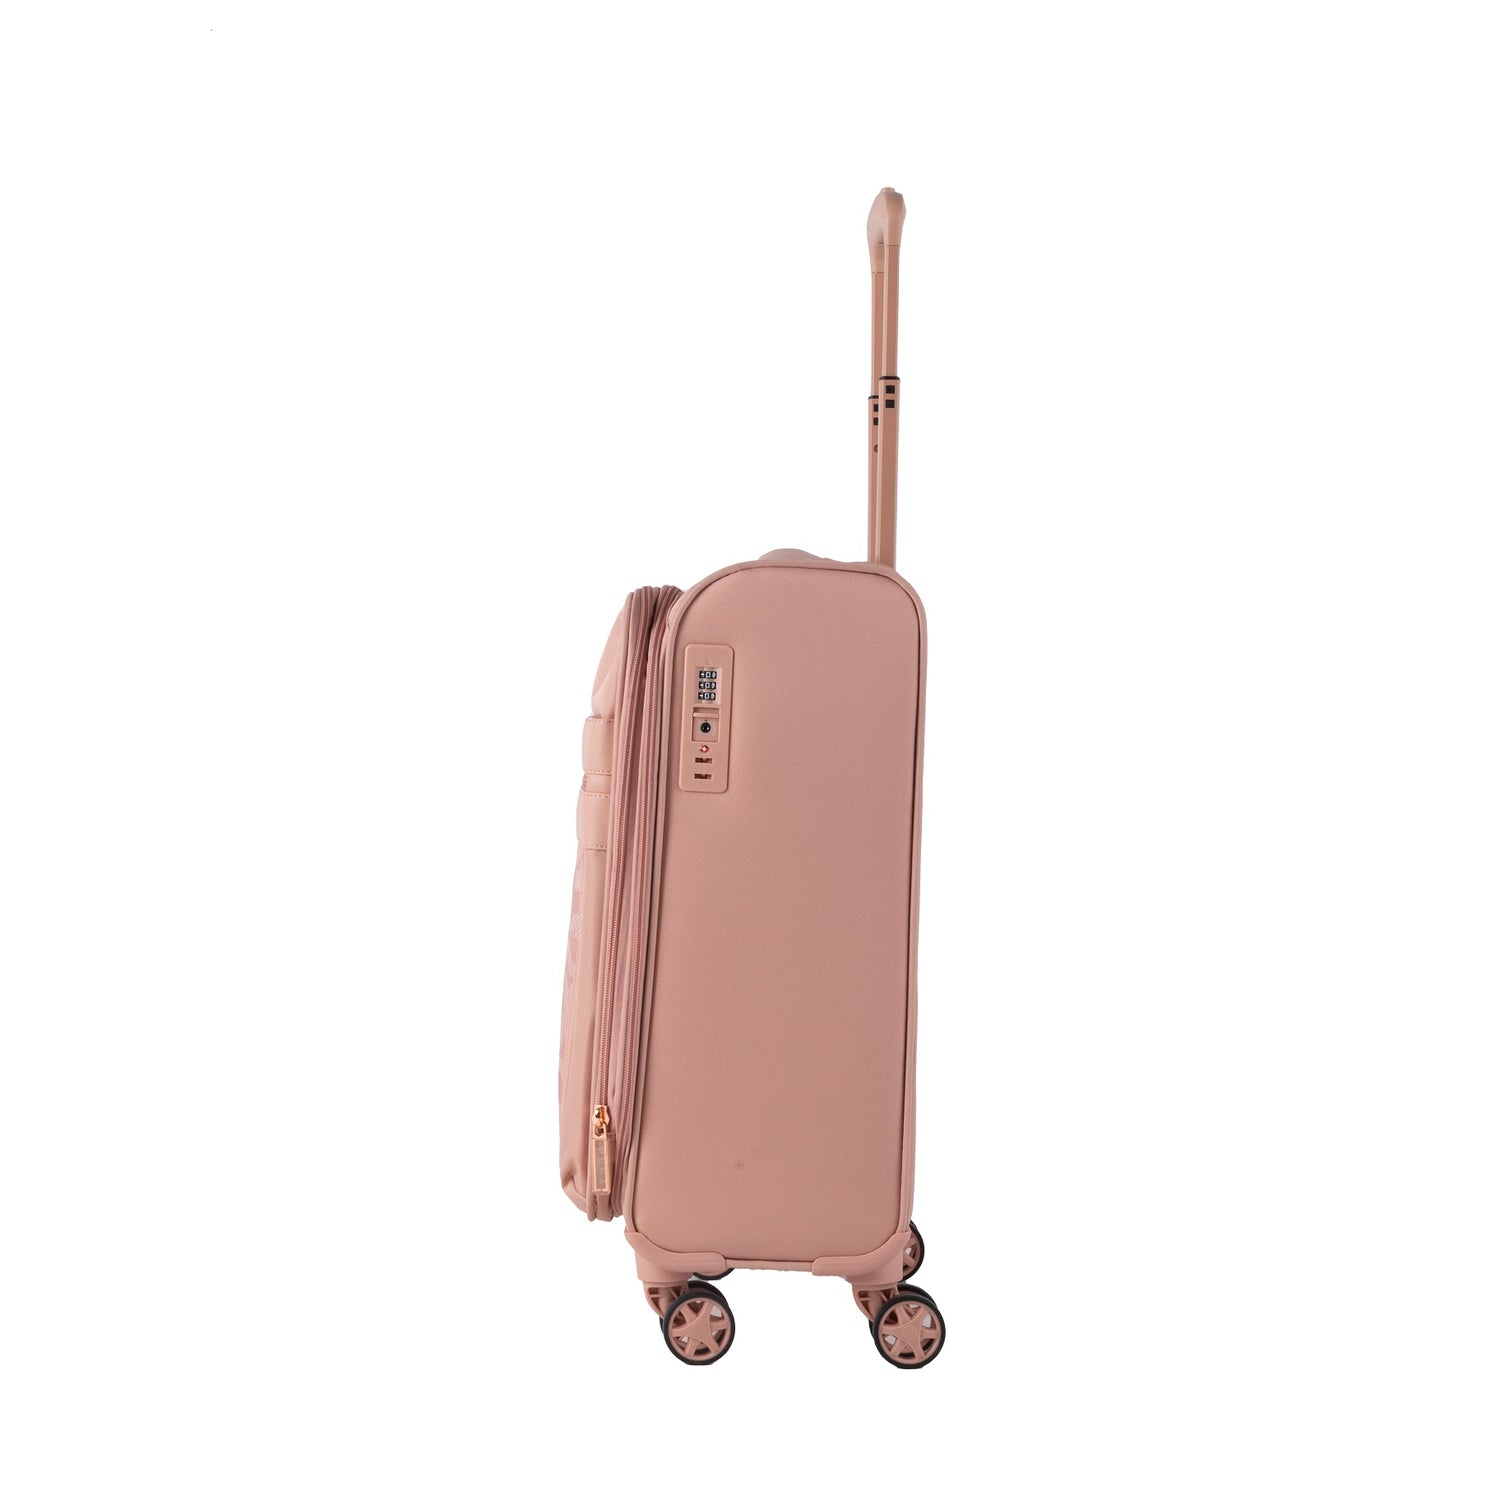 DKNY Pink Cabin Luggage